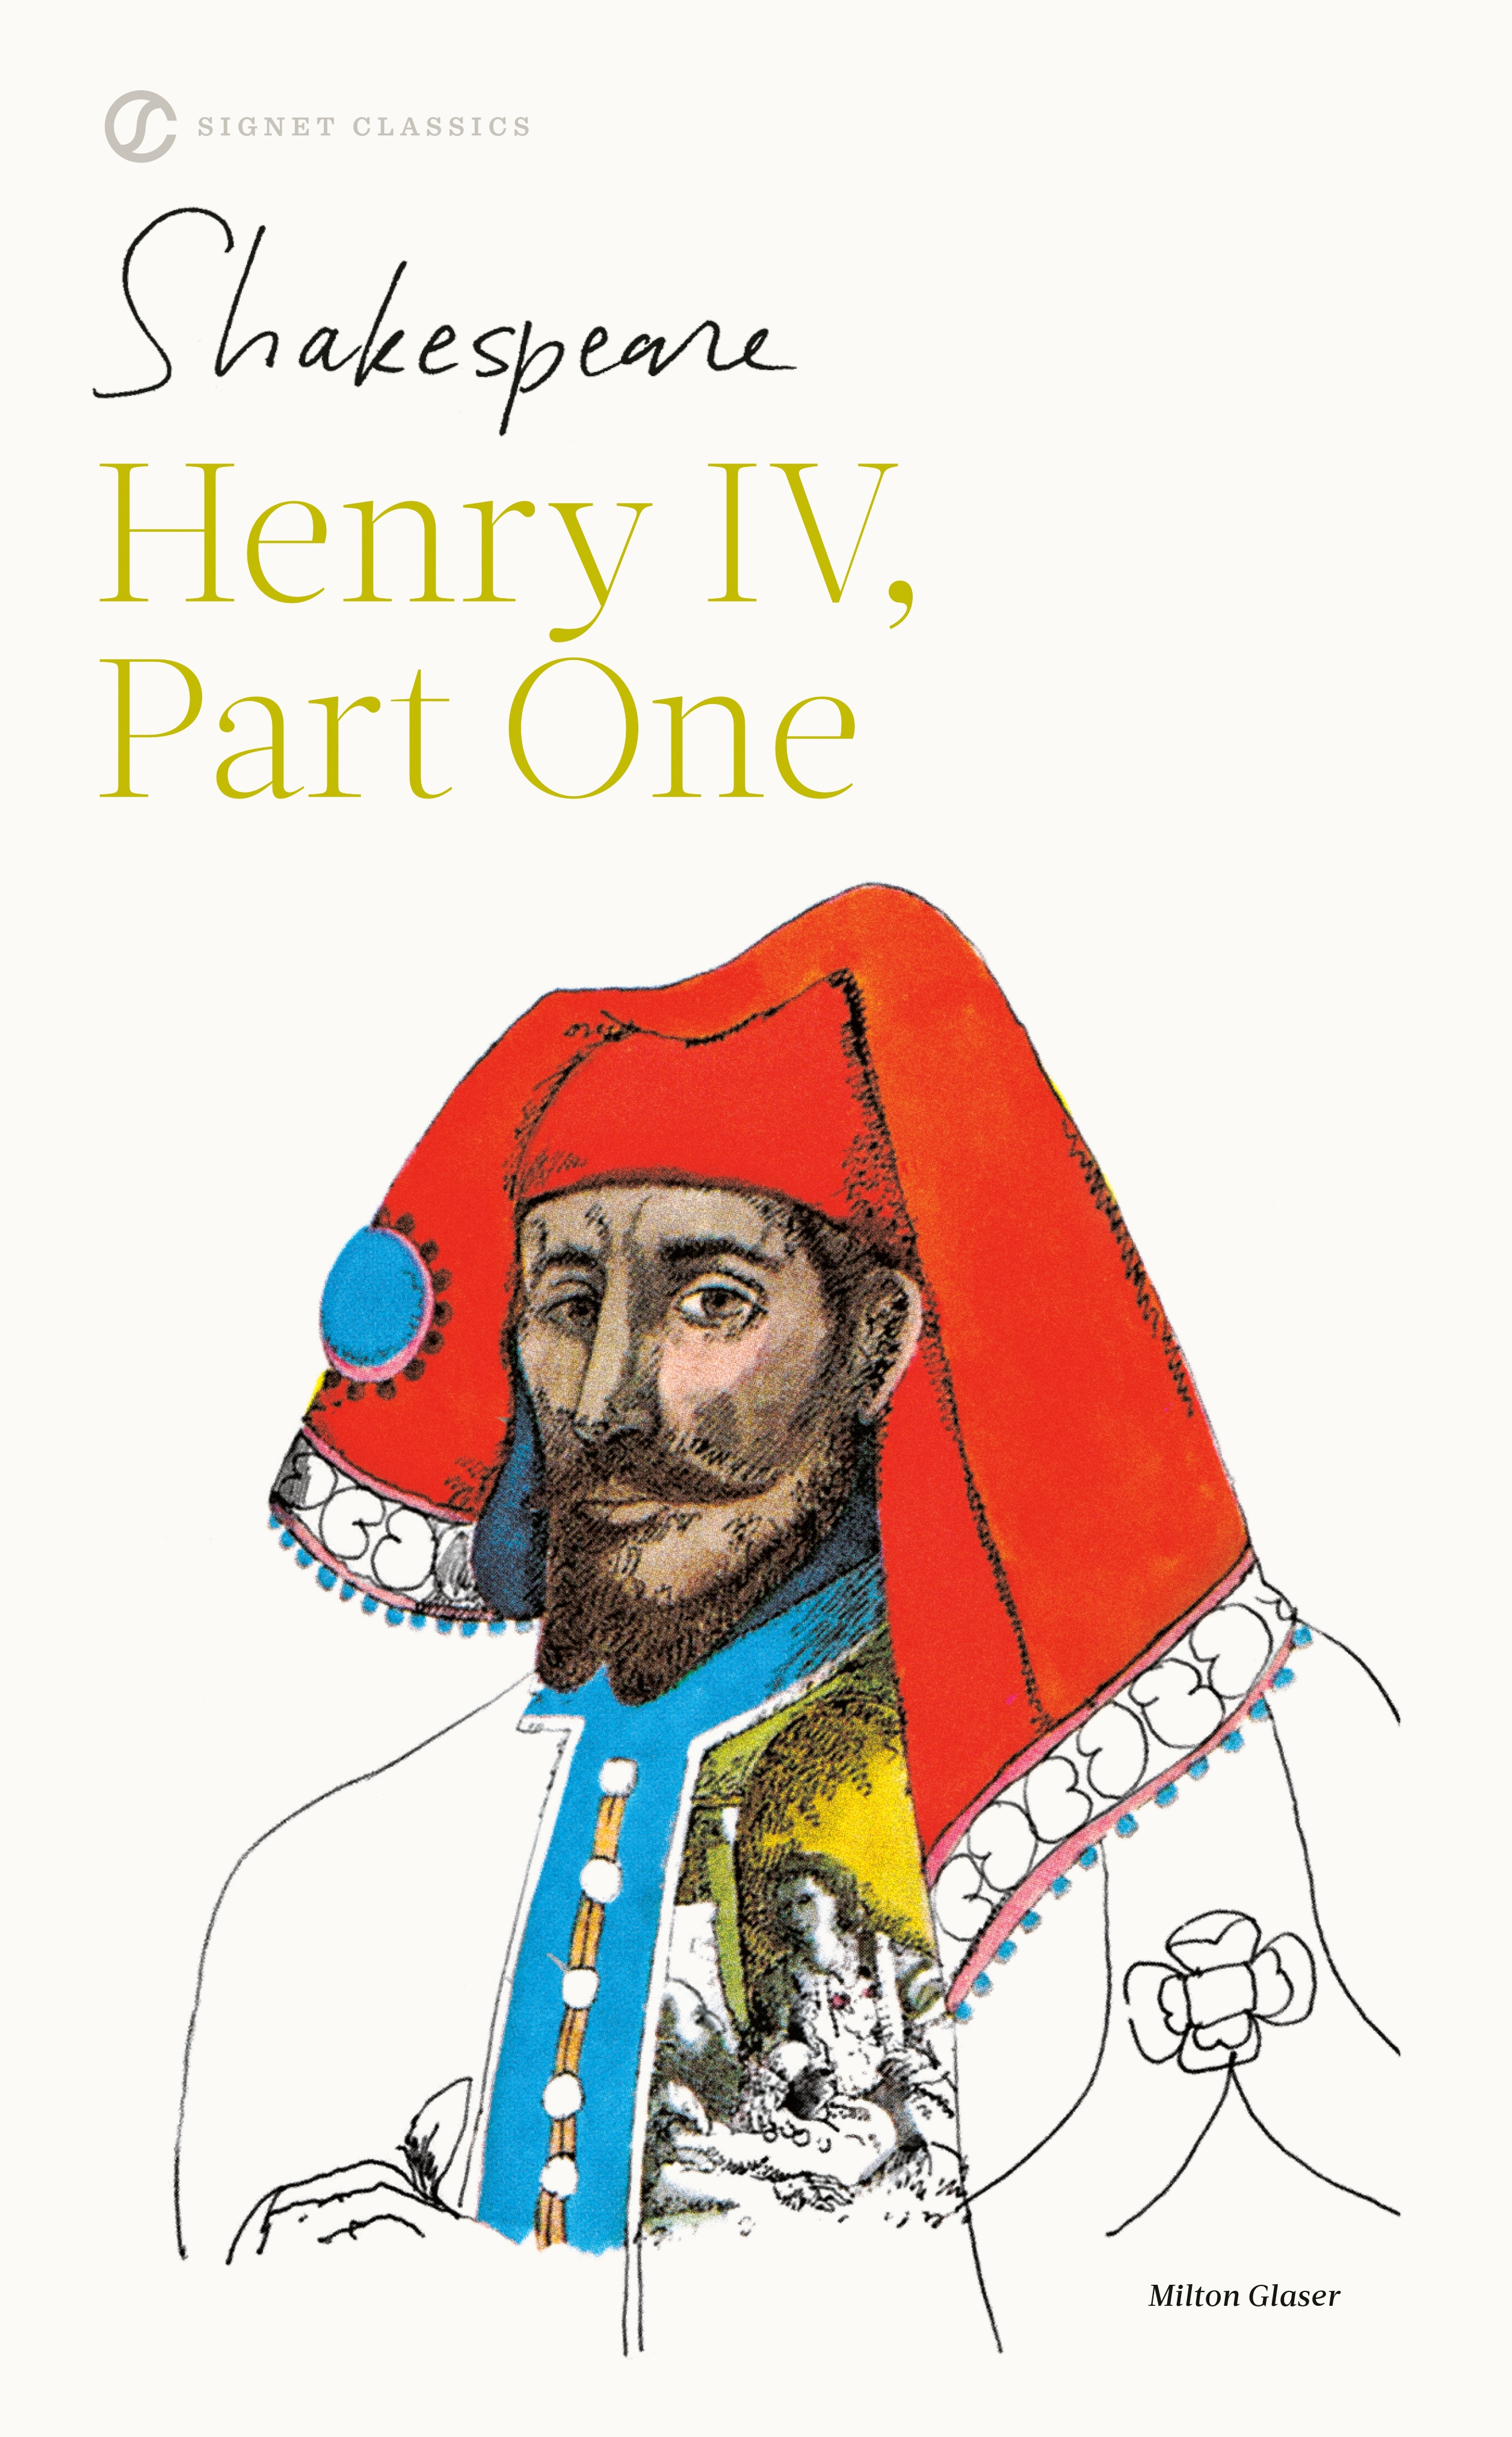 henry 4 part 1 by william shakespeare